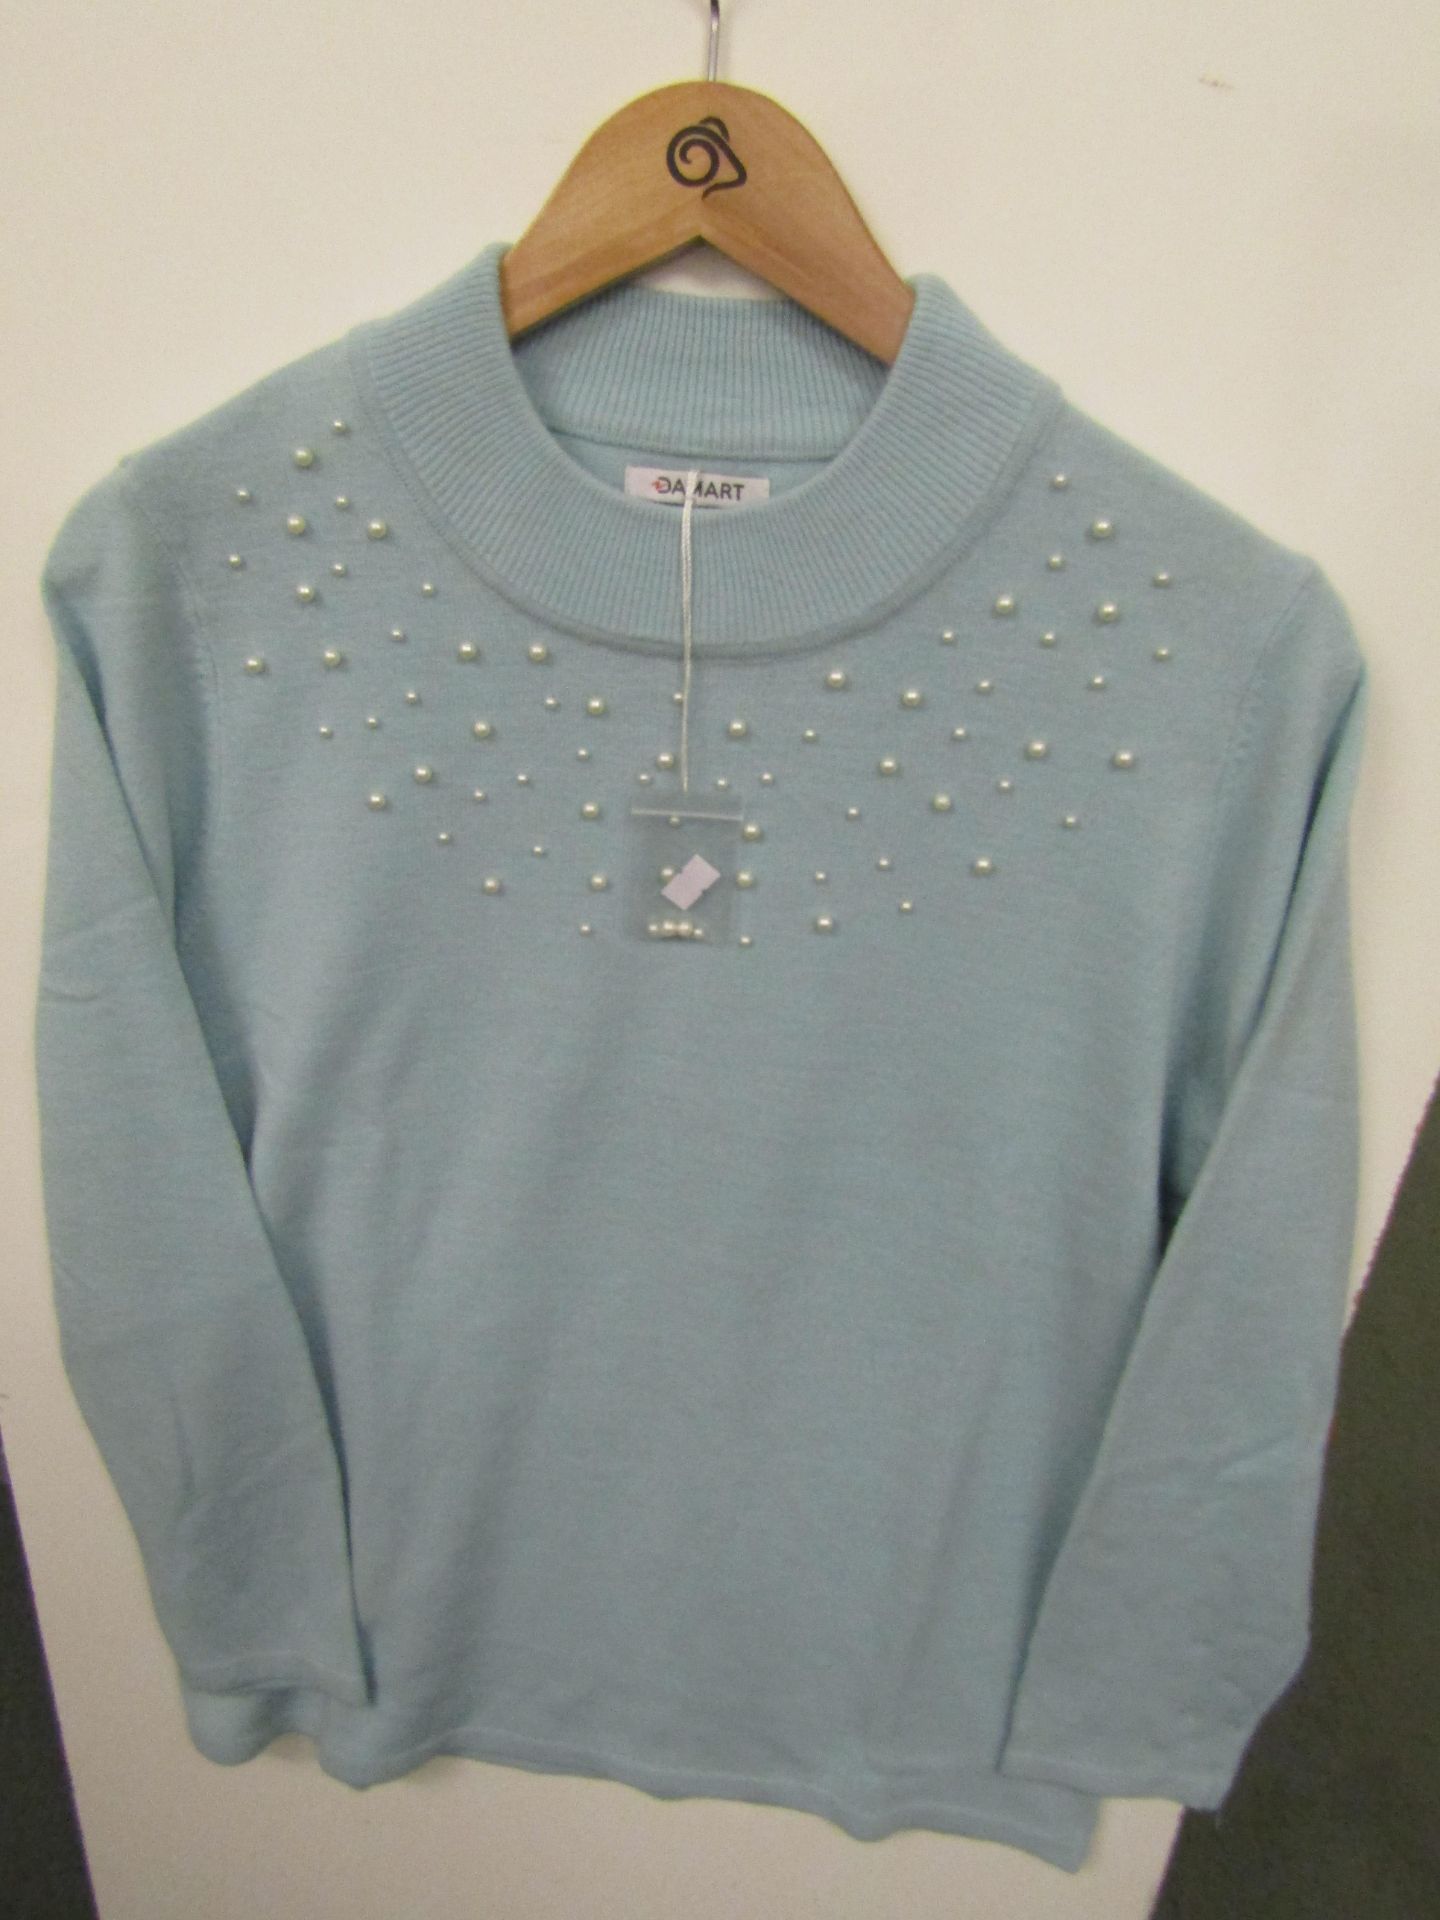 Damart Sweater with Pearls embelishments, new size 10-12